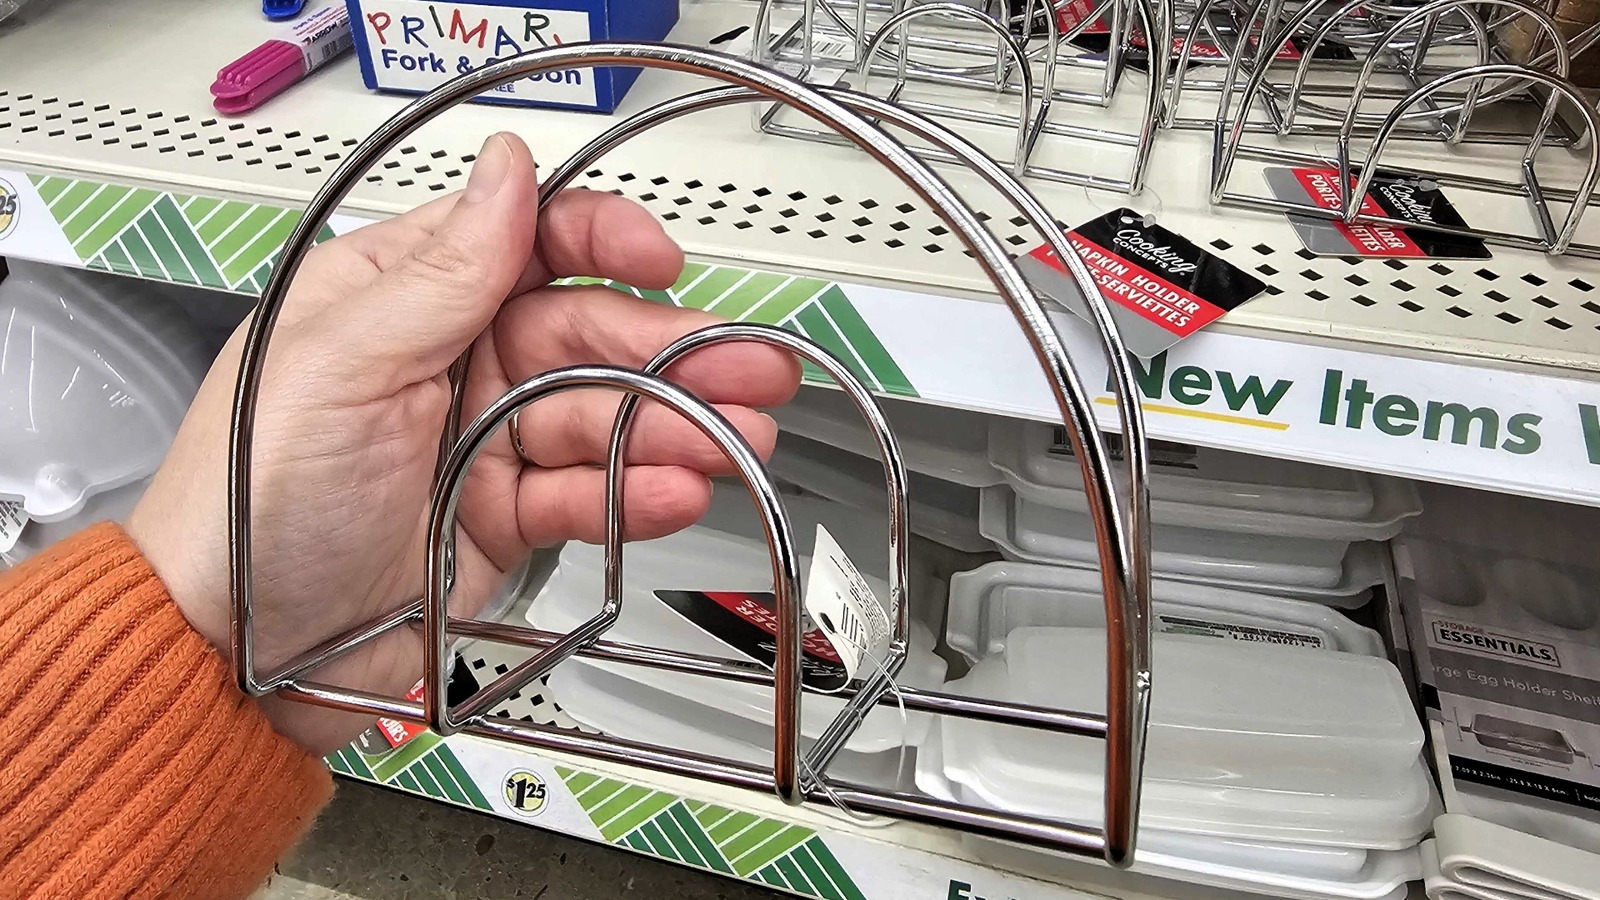 https://www.housedigest.com/img/gallery/keep-your-kitchen-cabinets-organized-with-this-genius-dollar-tree-hack/l-intro-1697819072.jpg